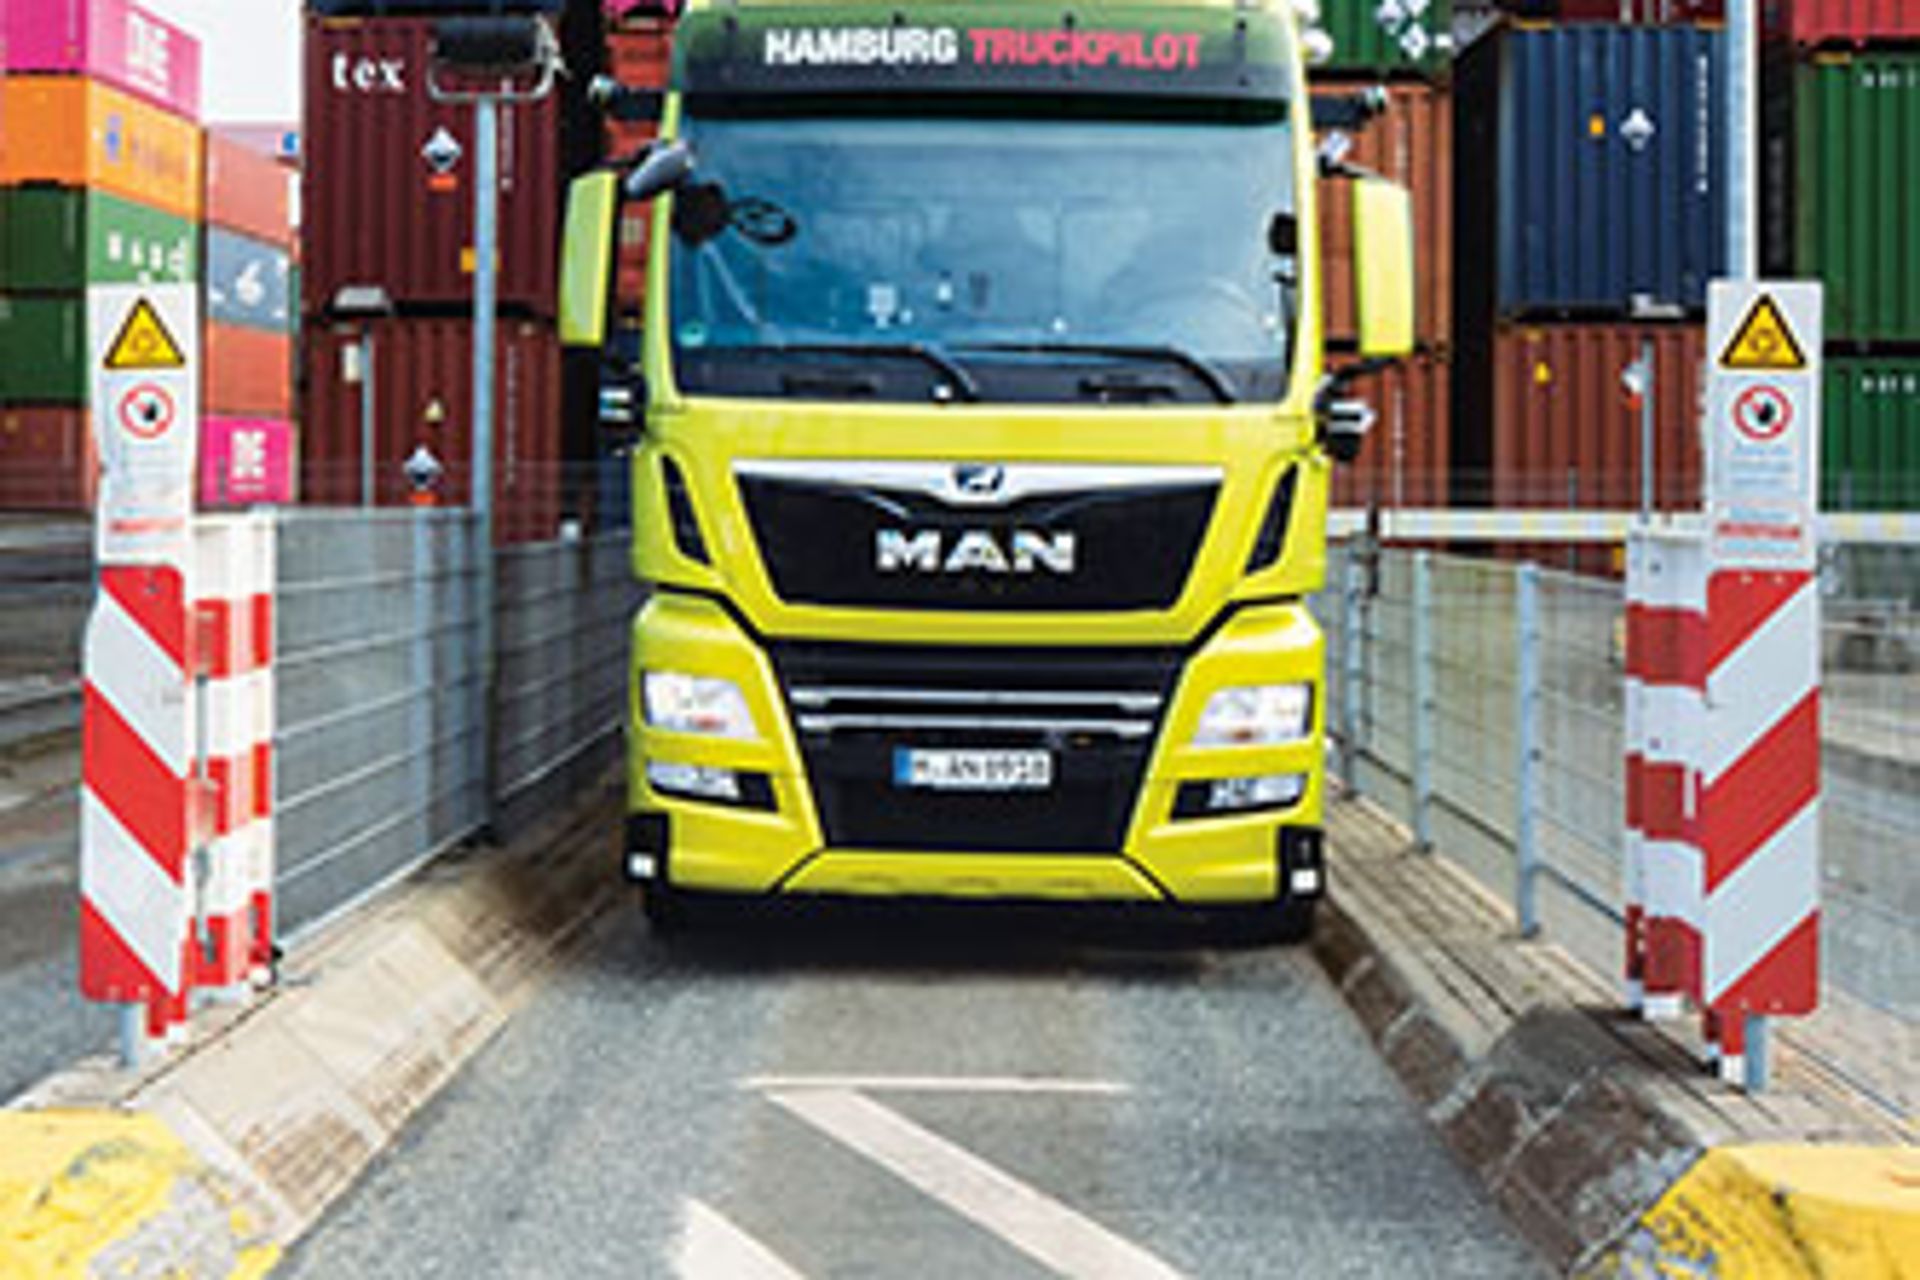 The “Hamburg TruckPilot” project paves the way for a considerably more efficient cargo handling process at major sea ports.
                 